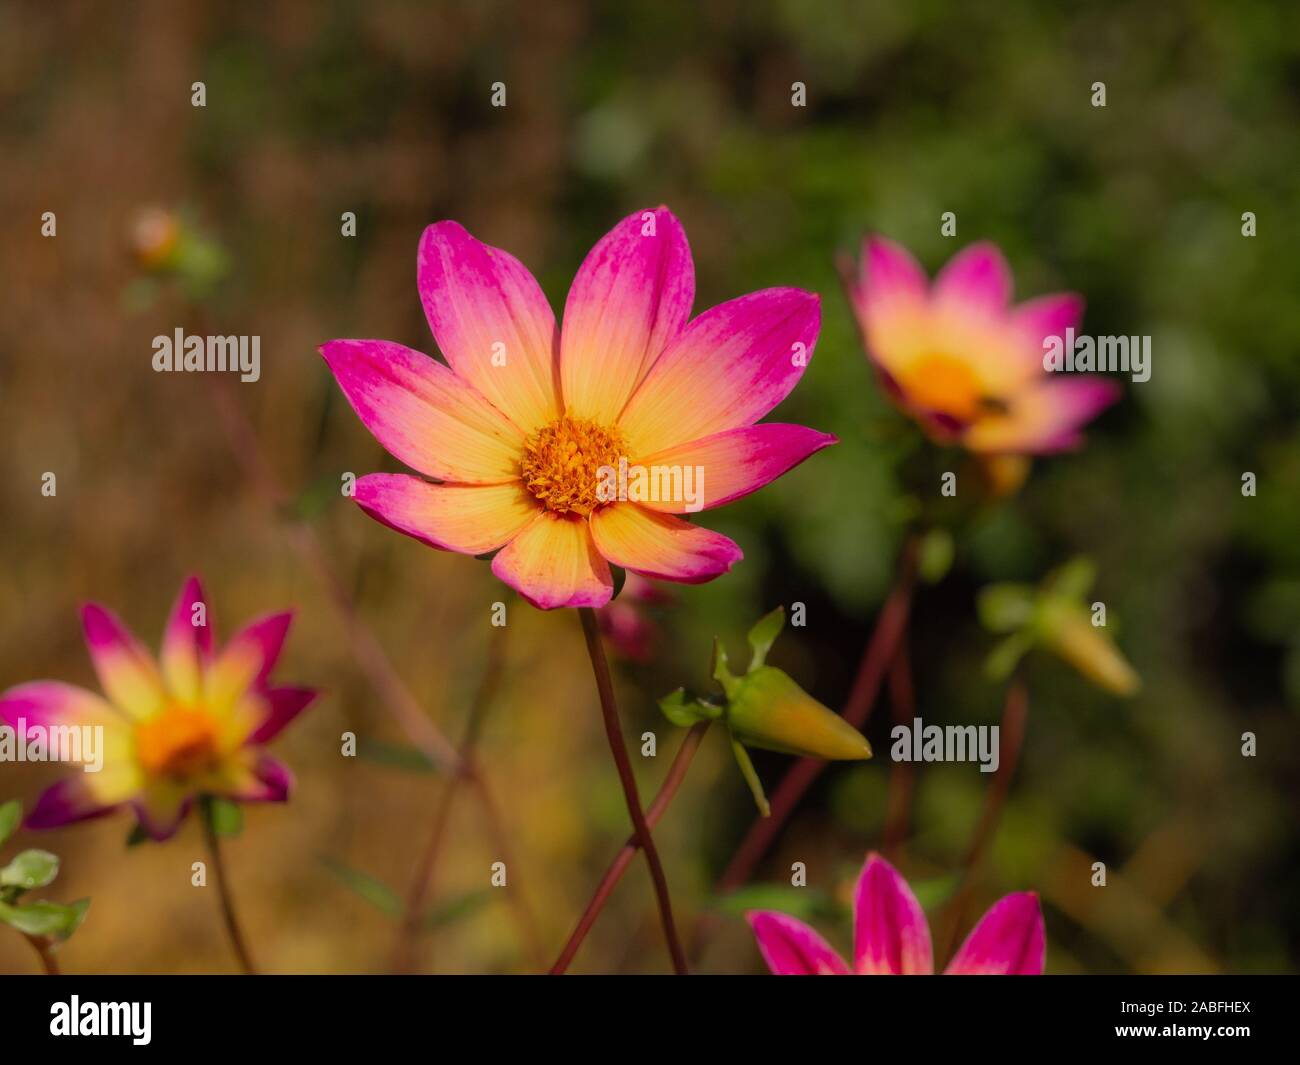 Pretty single Dahlia flowers with pink and yellow petals in an autumn garden Stock Photo